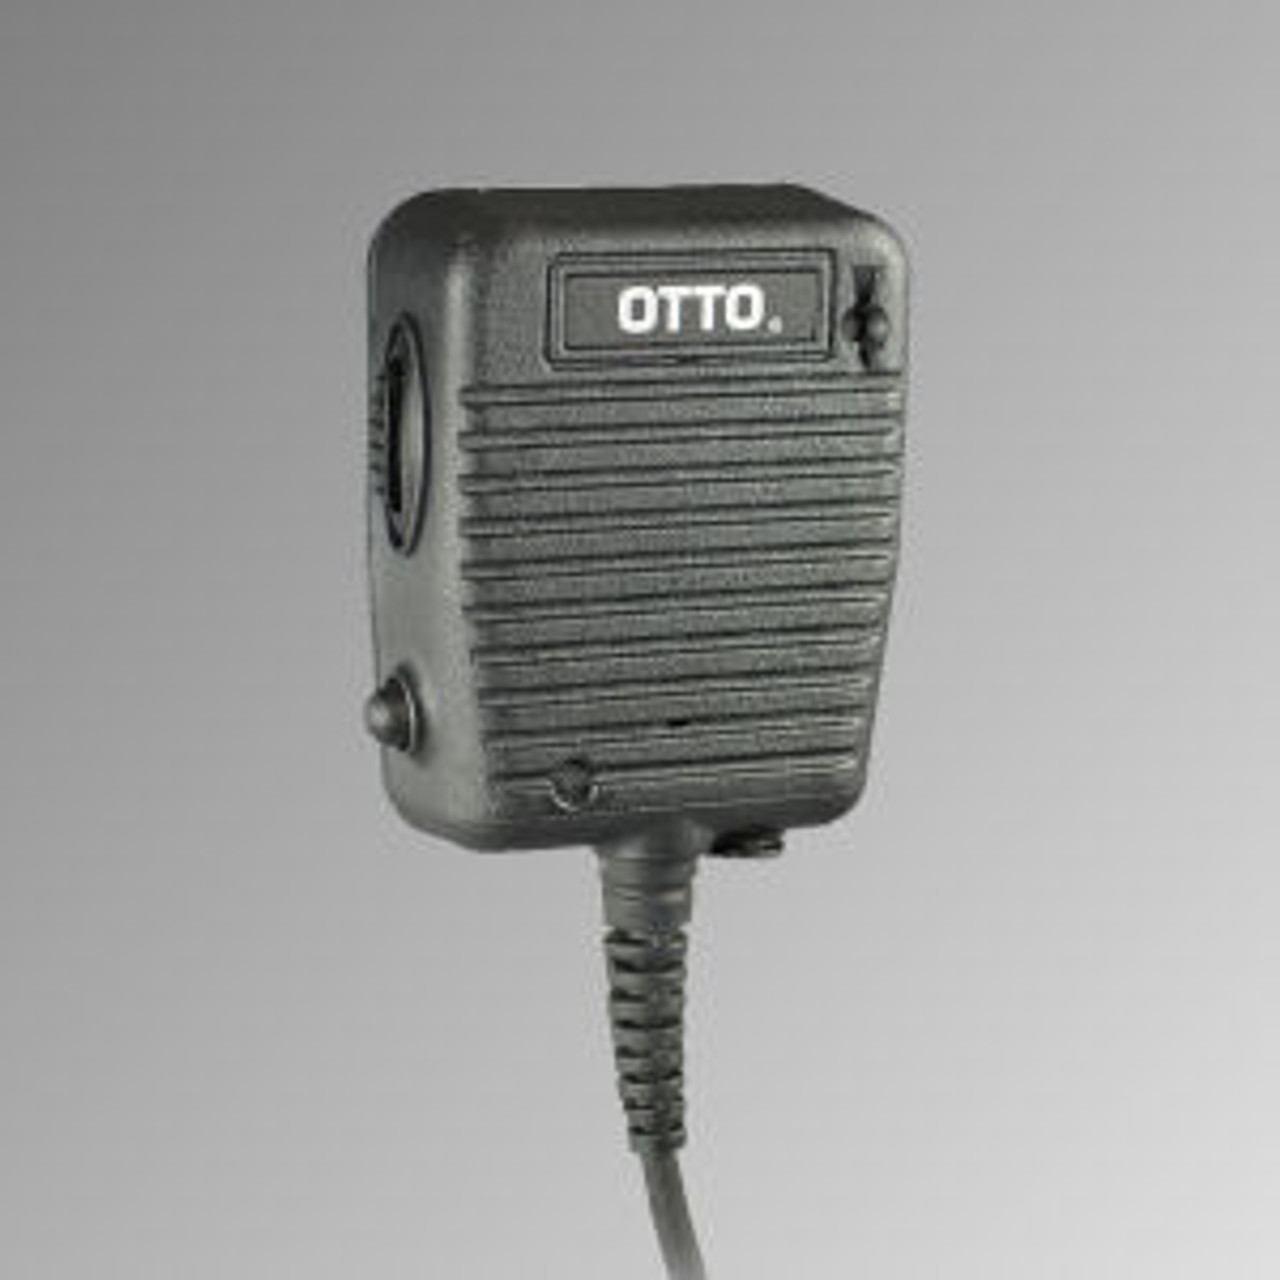 Otto Storm Mic For Relm / BK EPU